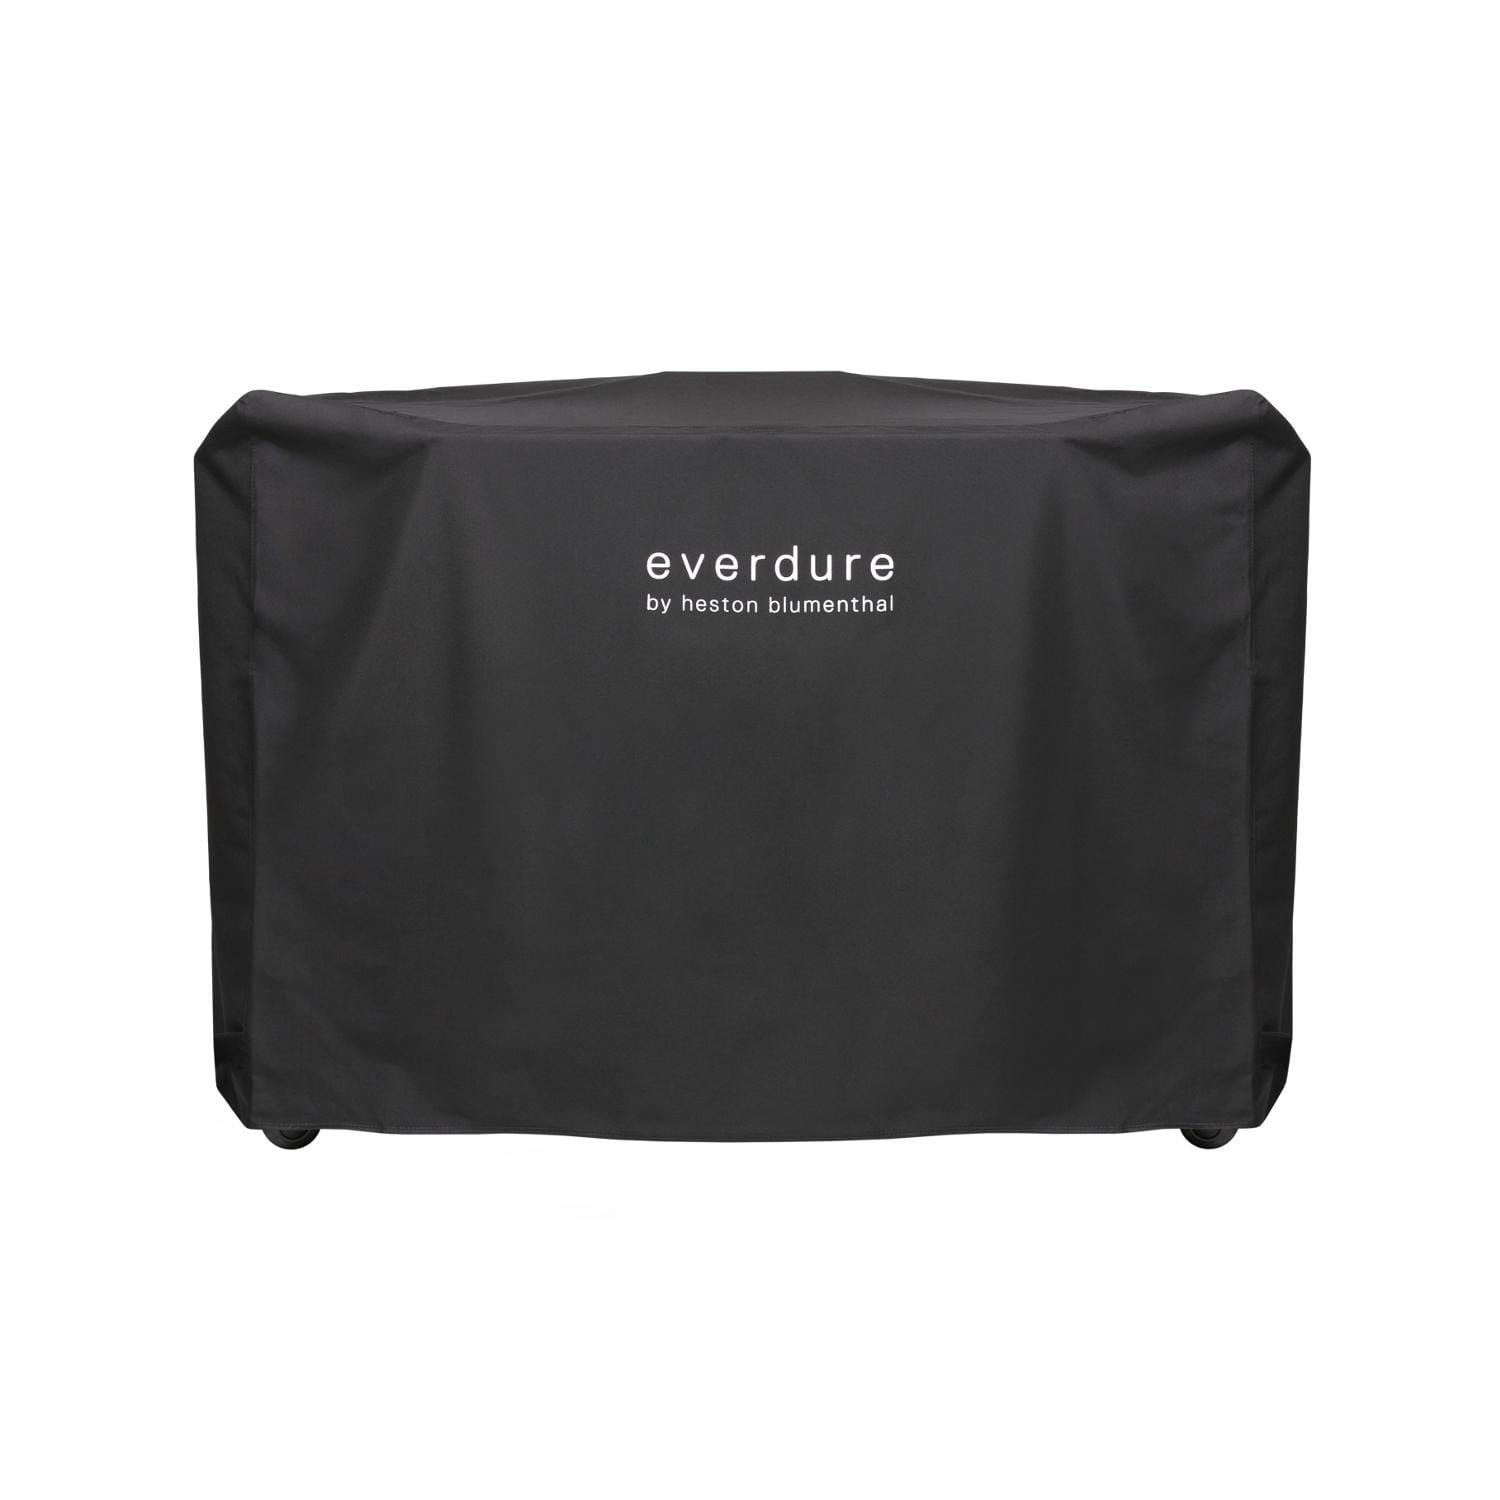 Everdure Grill Covers Everdure By Heston Blumenthal Long Grill Cover For HUB 54-Inch Charcoal Grill